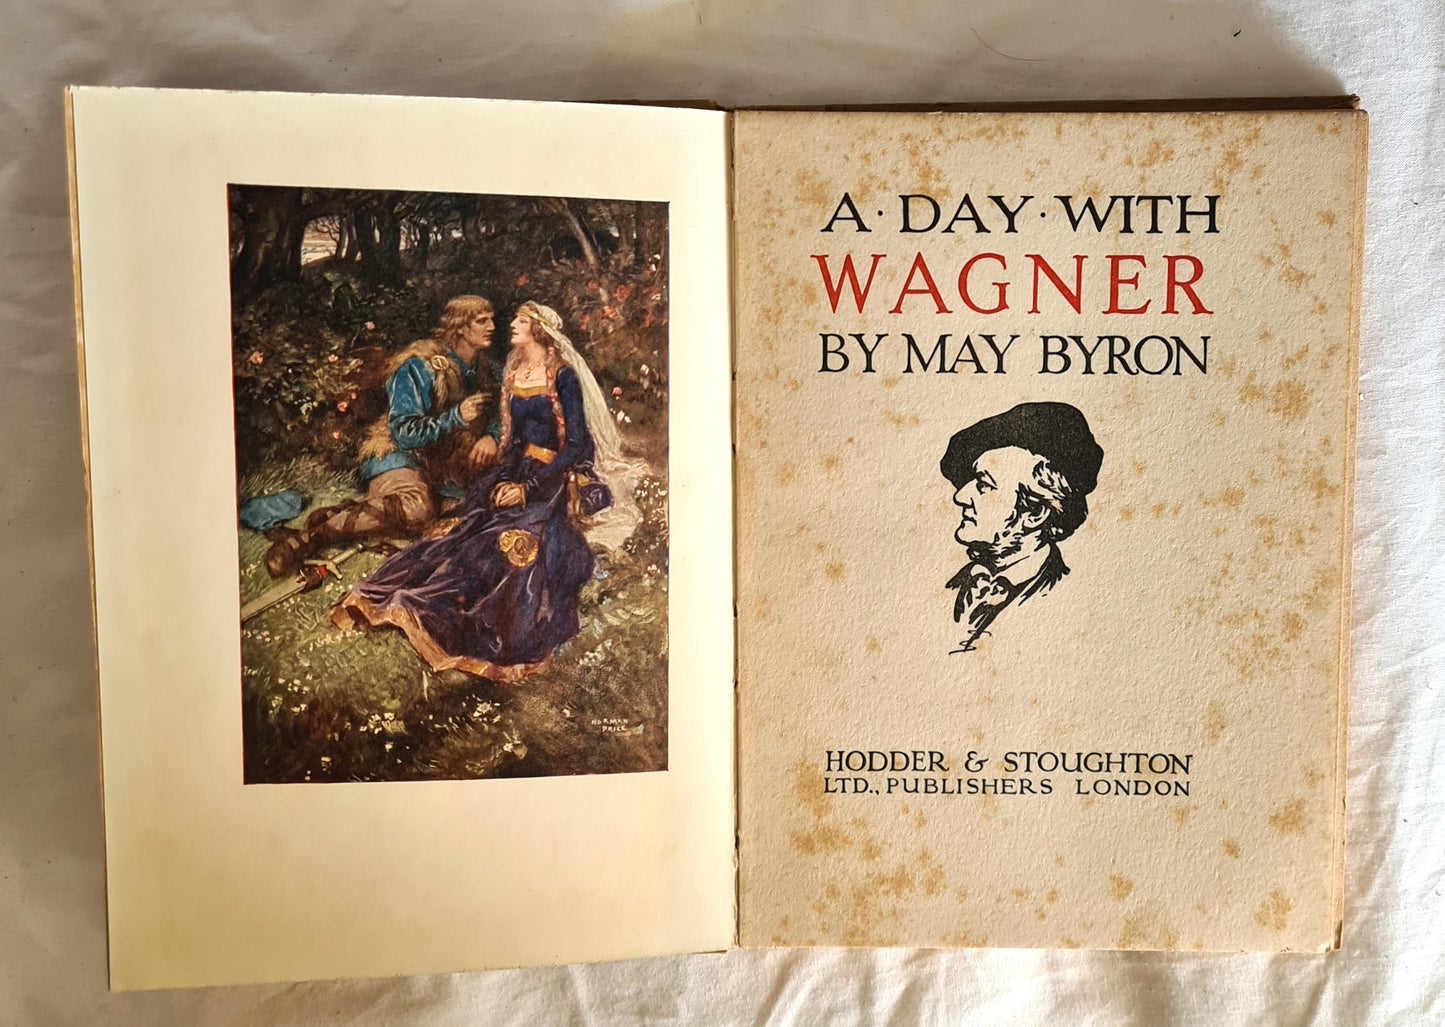 A Day With Wagner by May Byron